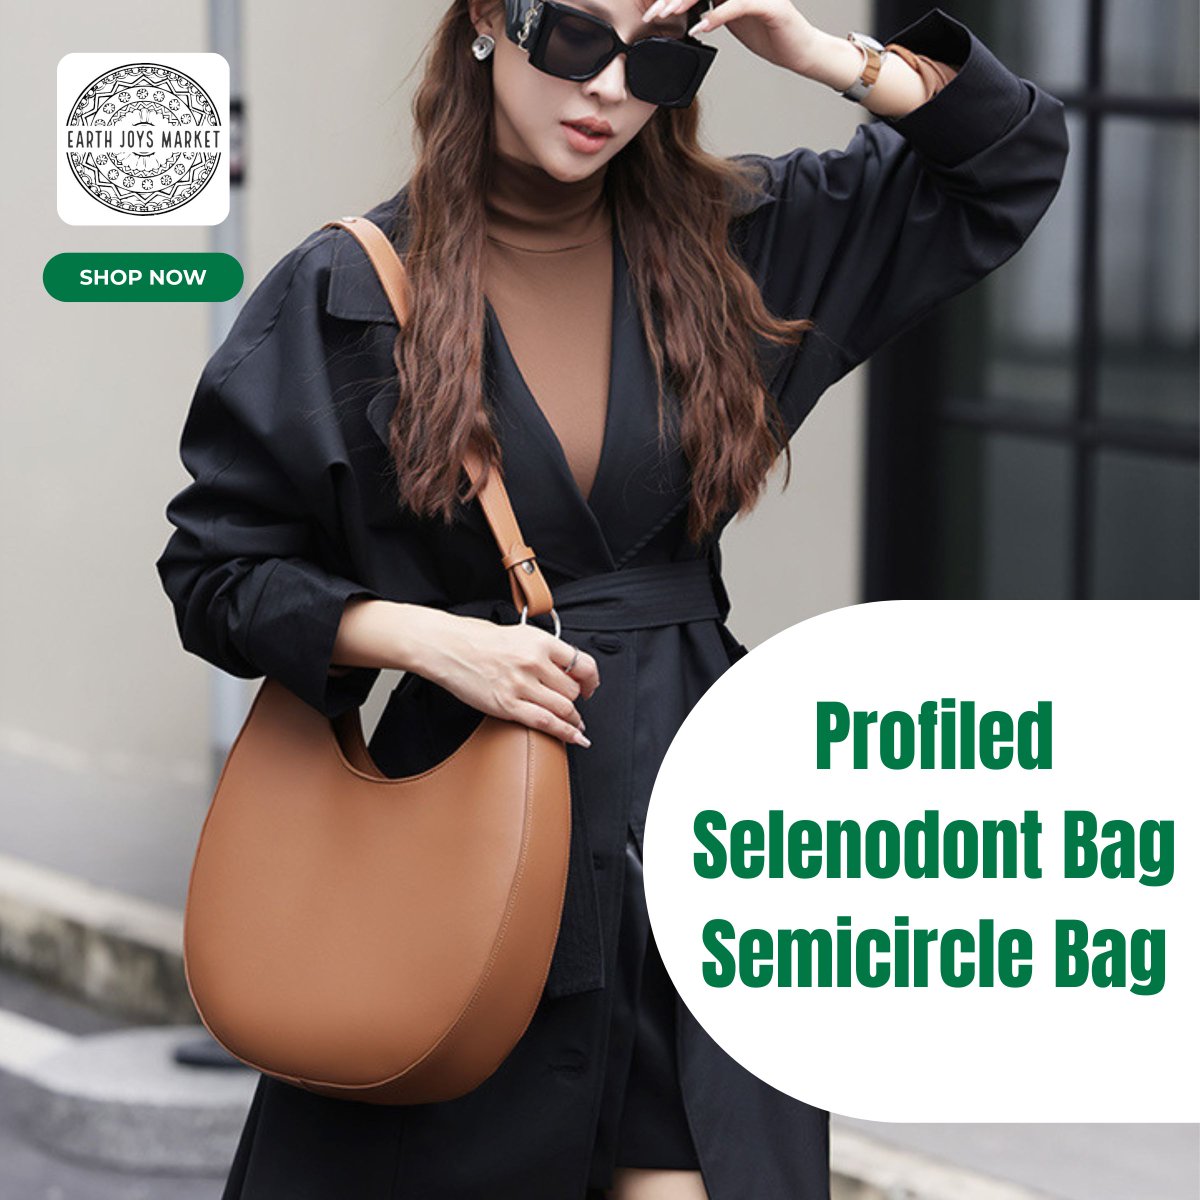 '✨ Discover the Special-interest Design Profiled Selenodont Semicircle Bag at Earth Joys Market! Shop Now: ➡ earthjoysmarket.com/product/specia… #Bags #LuxuryBag #LadiesBag #TopBagCollection #EarthJoysMarket #Amazon #amazonfinds2024 #alibabacloud #aliexpress